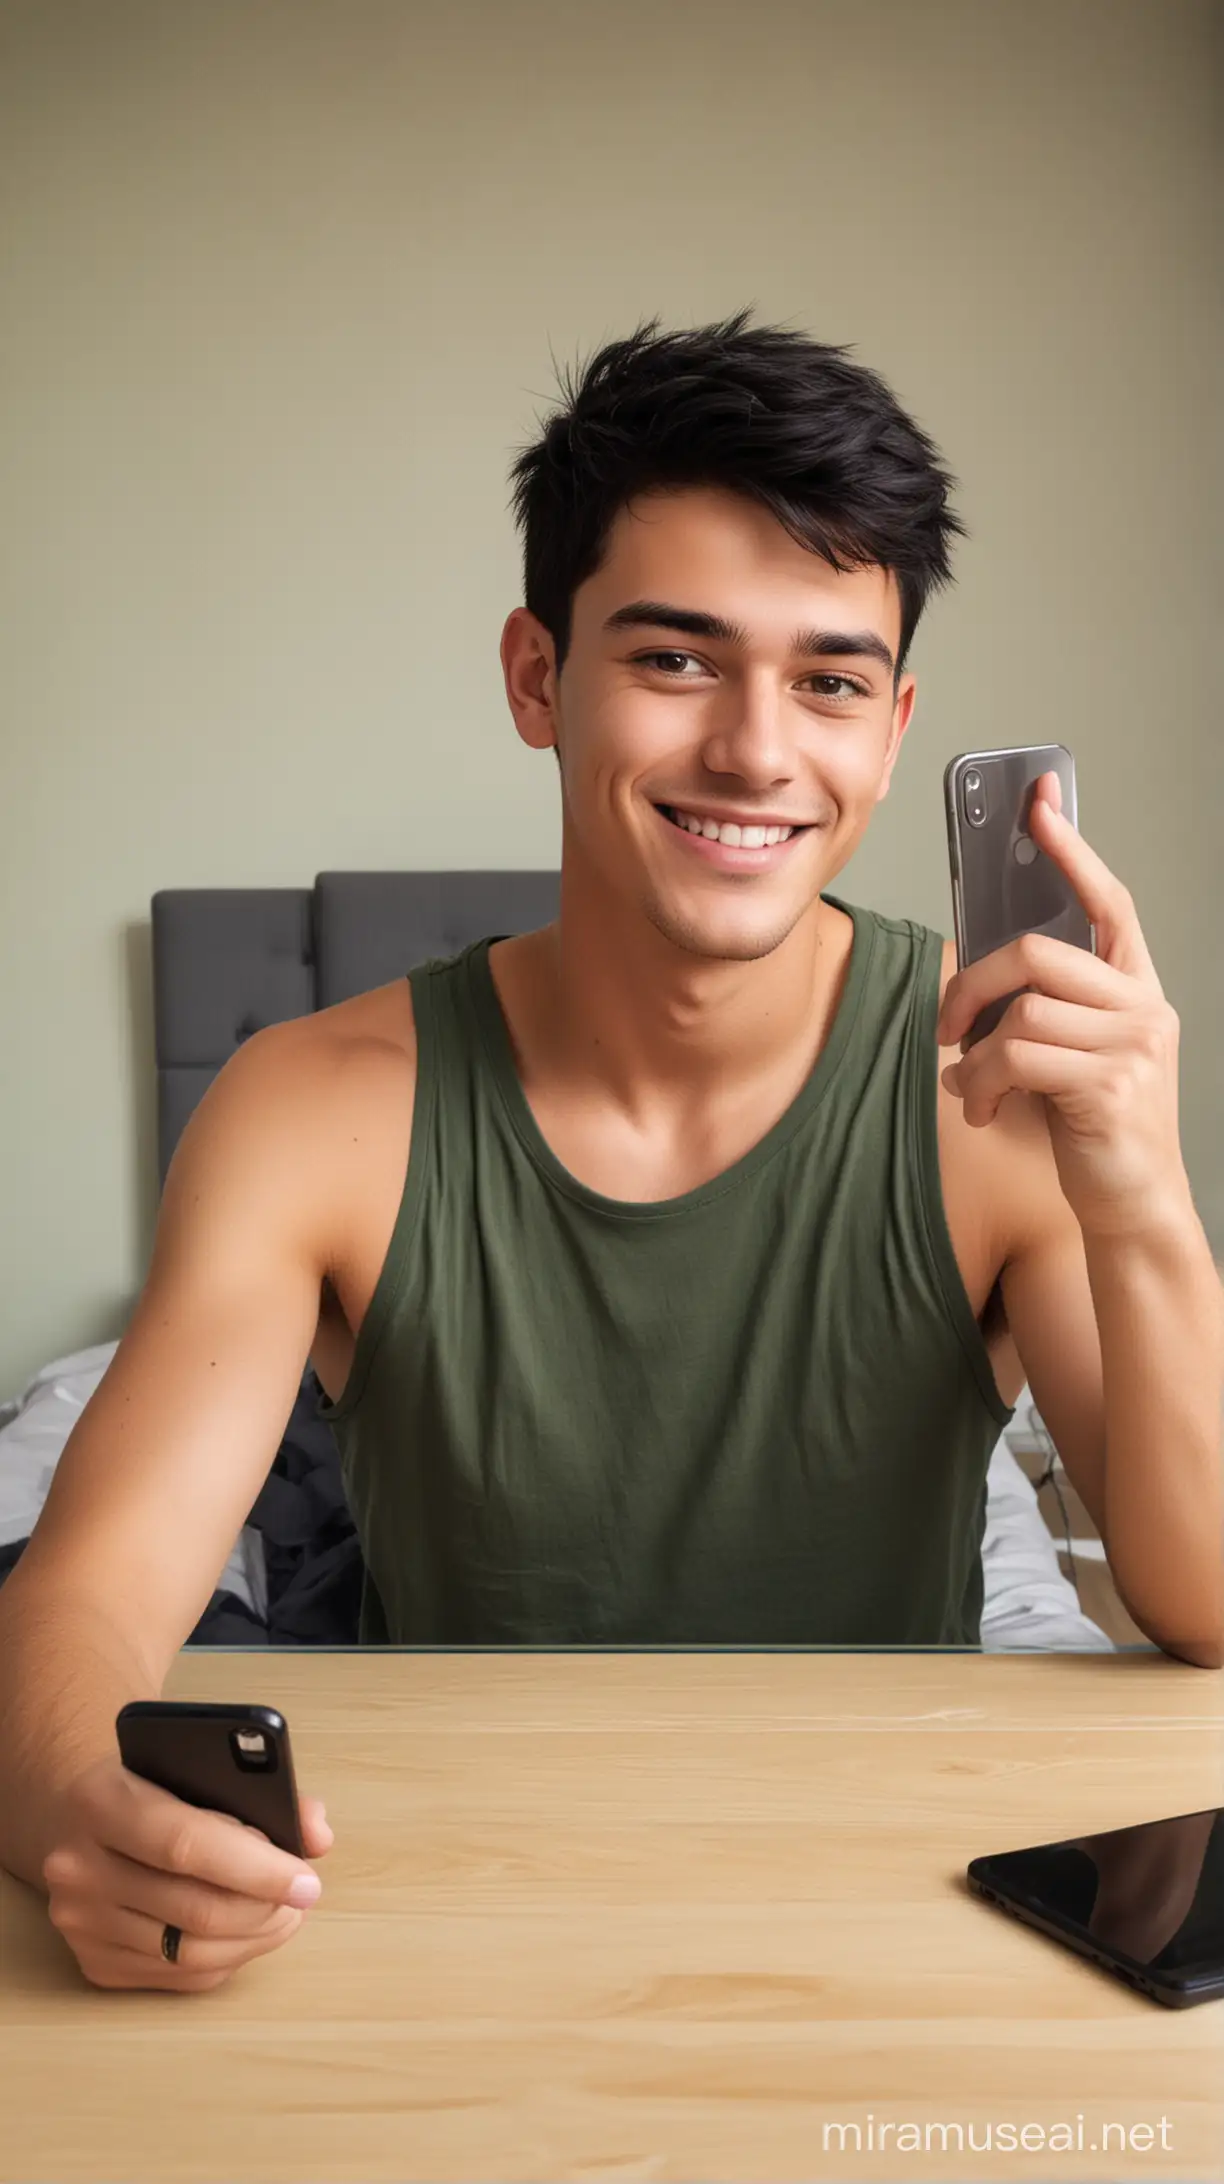 Smiling Young Man in Sage Bedroom Takes Selfie with Laptop Nearby